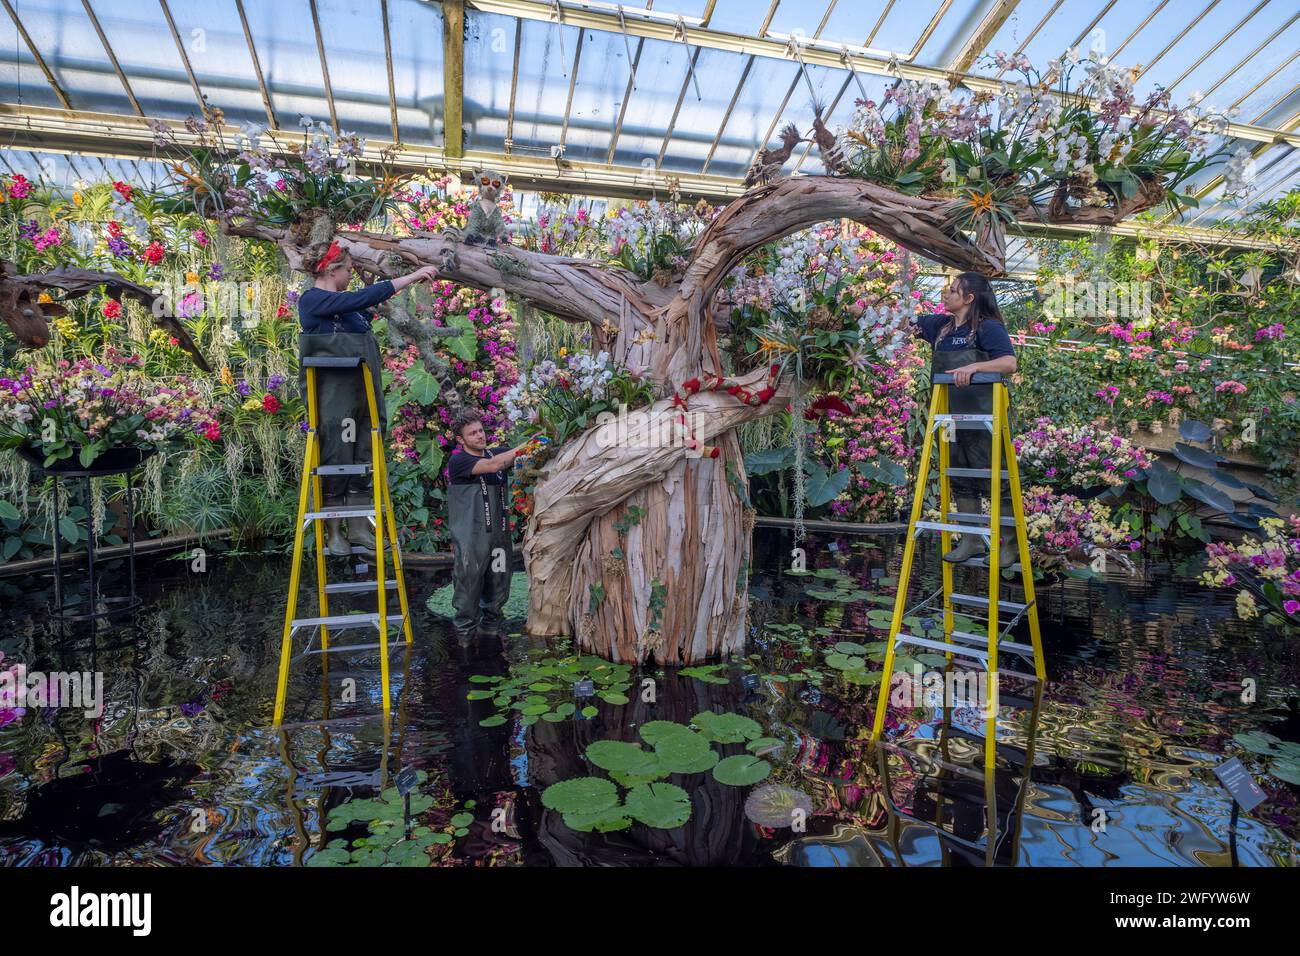 Orchid Festival at Kew Gardens. Vibrant orchid flora from Madagascar forms this years festival display in the Princess of Wales Conservatory. Stock Photo